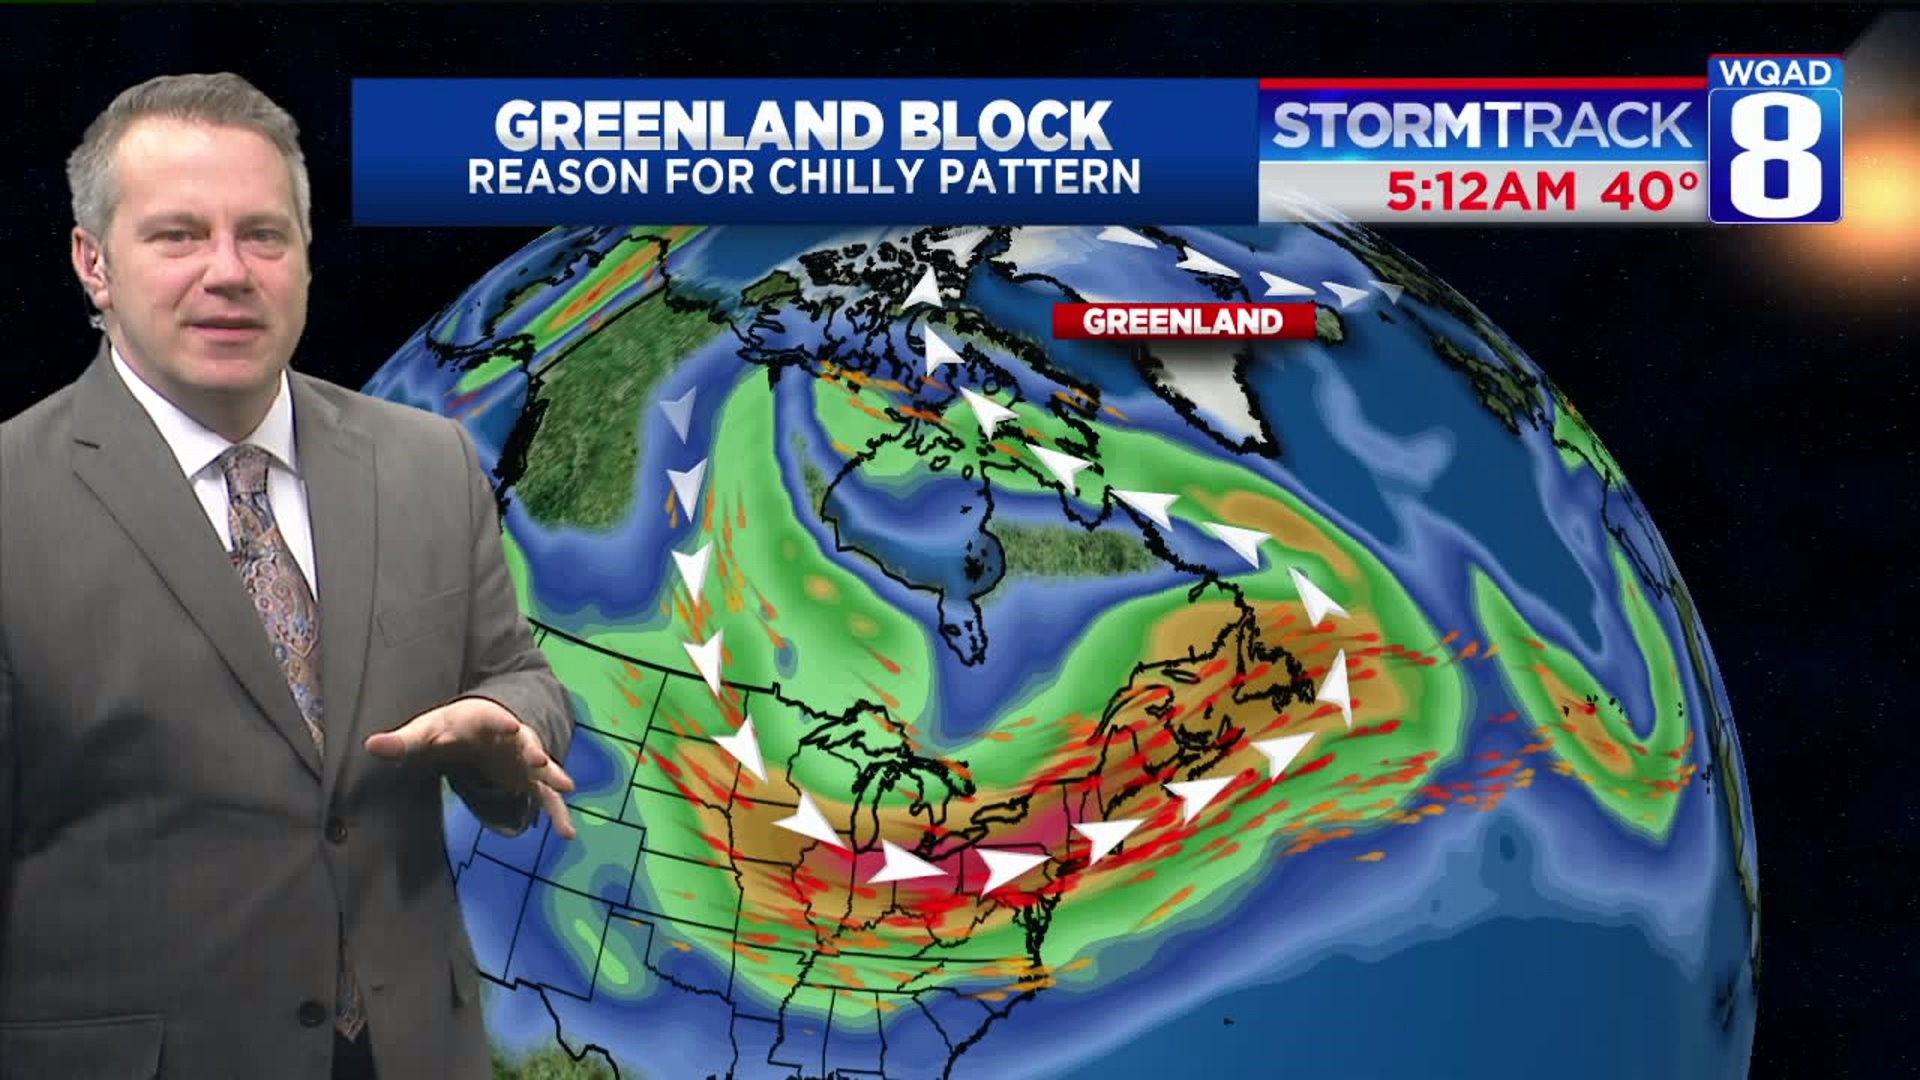 Pattern looks cold and rainy for Easter Weekend